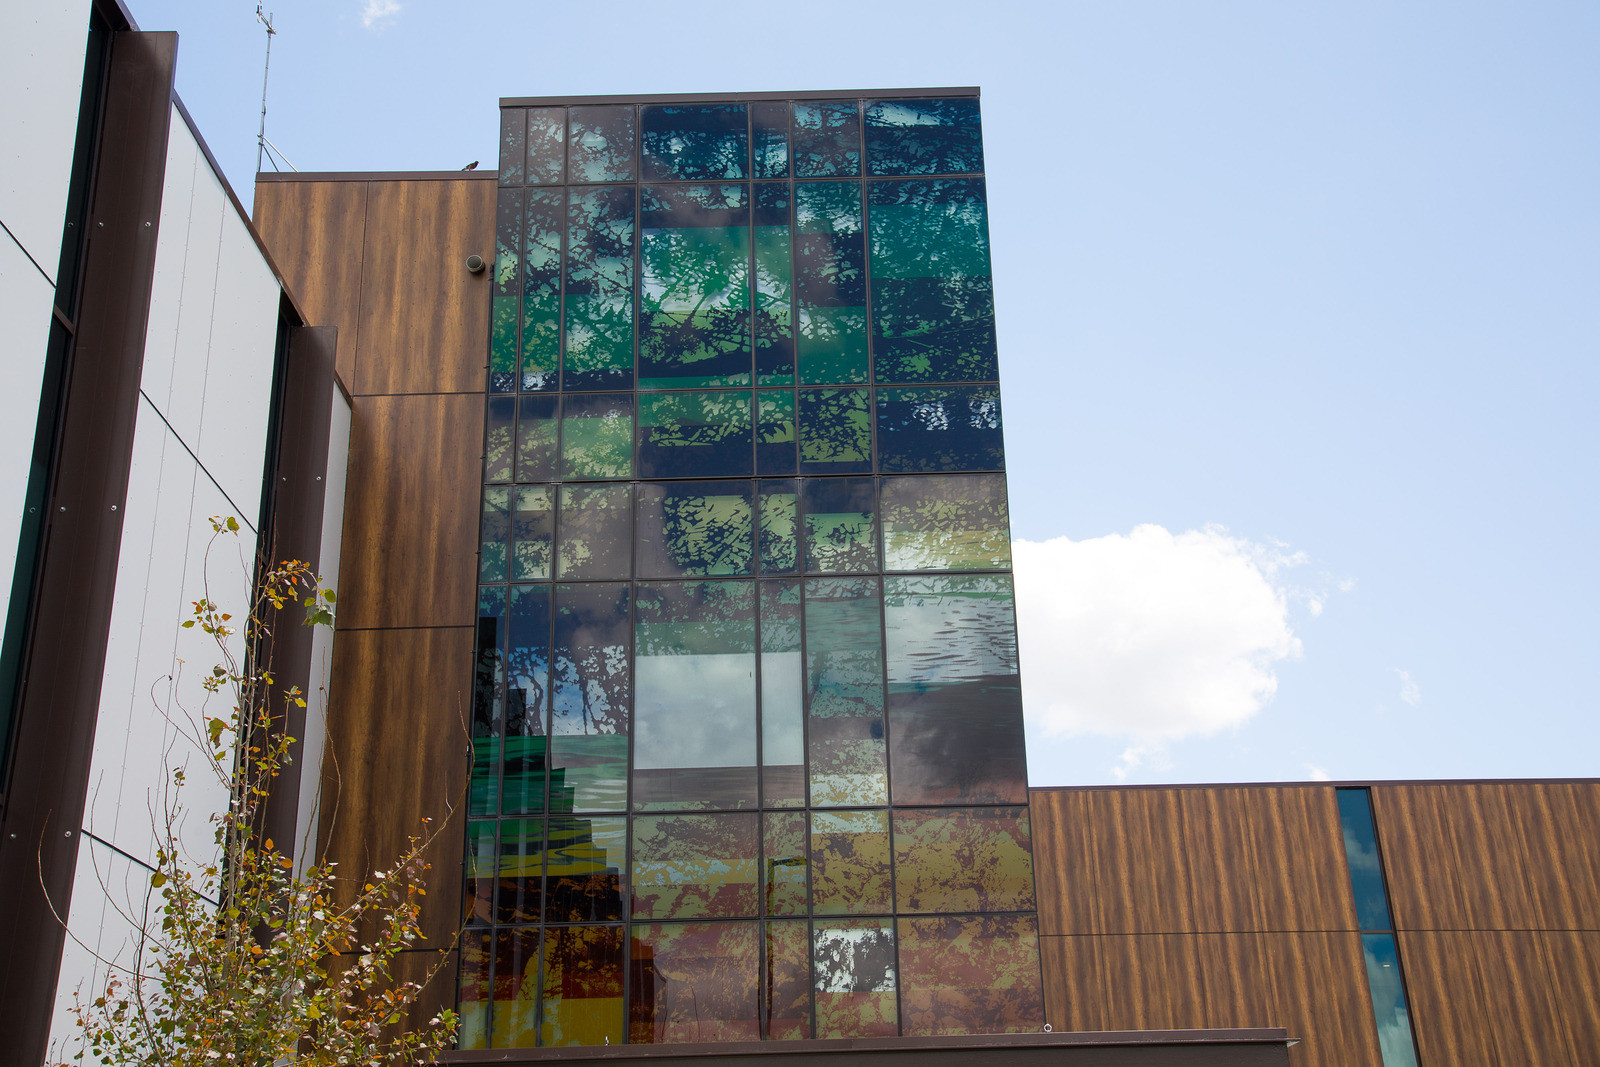 Decorative glass patterned exterior with intricate patterns next to wooden and white panels